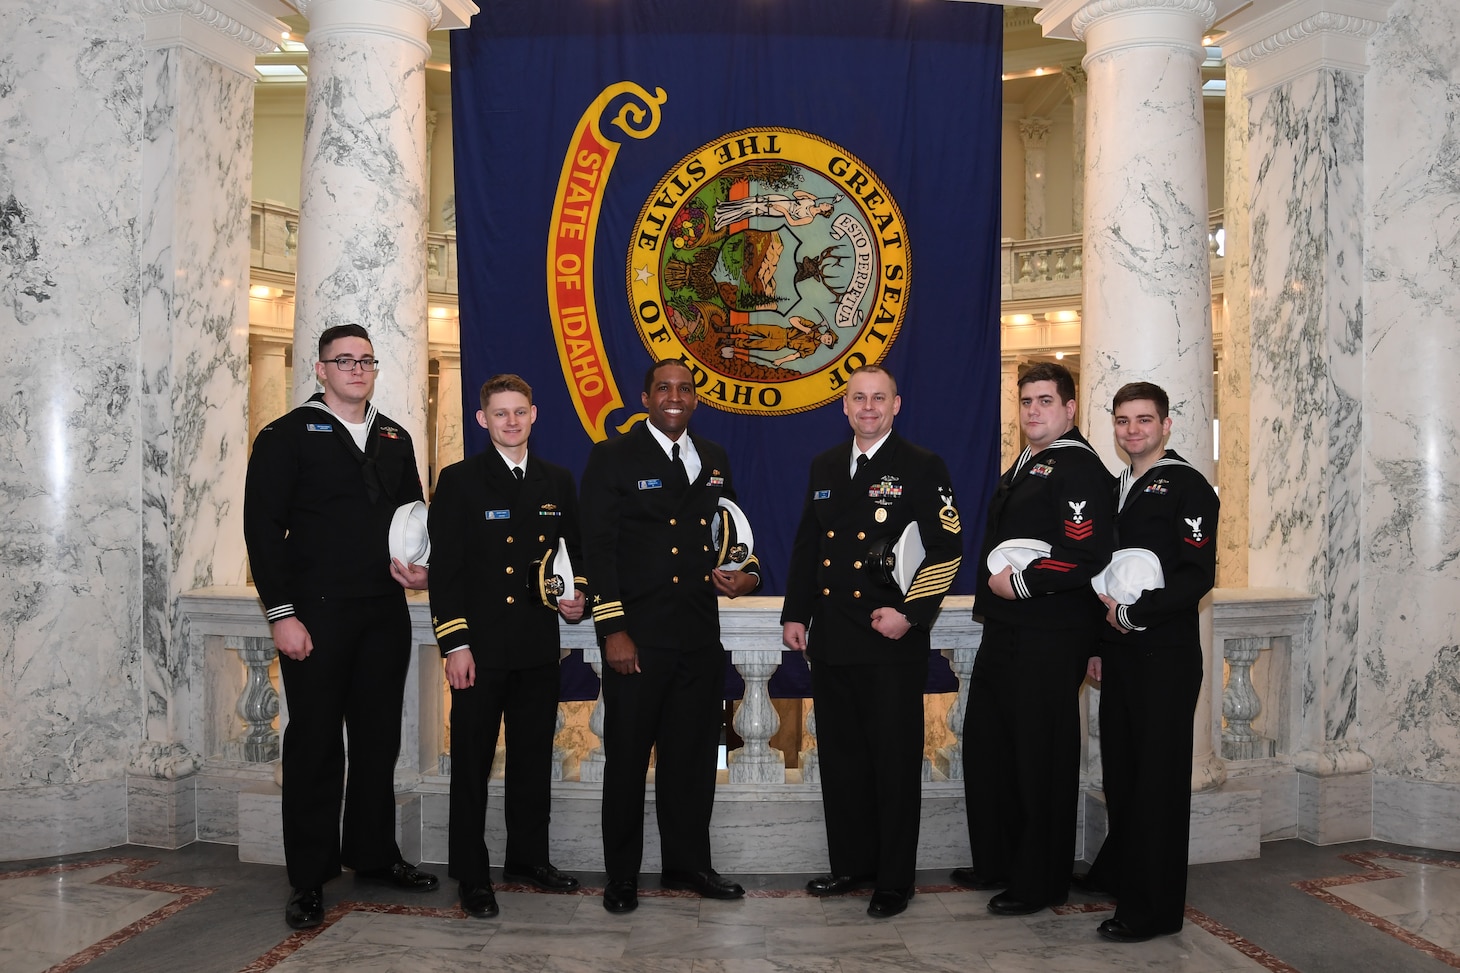 Crewmembers from the future USS Idaho (SSN 799) pose in front of the Idaho state flag during a tour of the capital building in Boise, Idaho, Jan. 25.